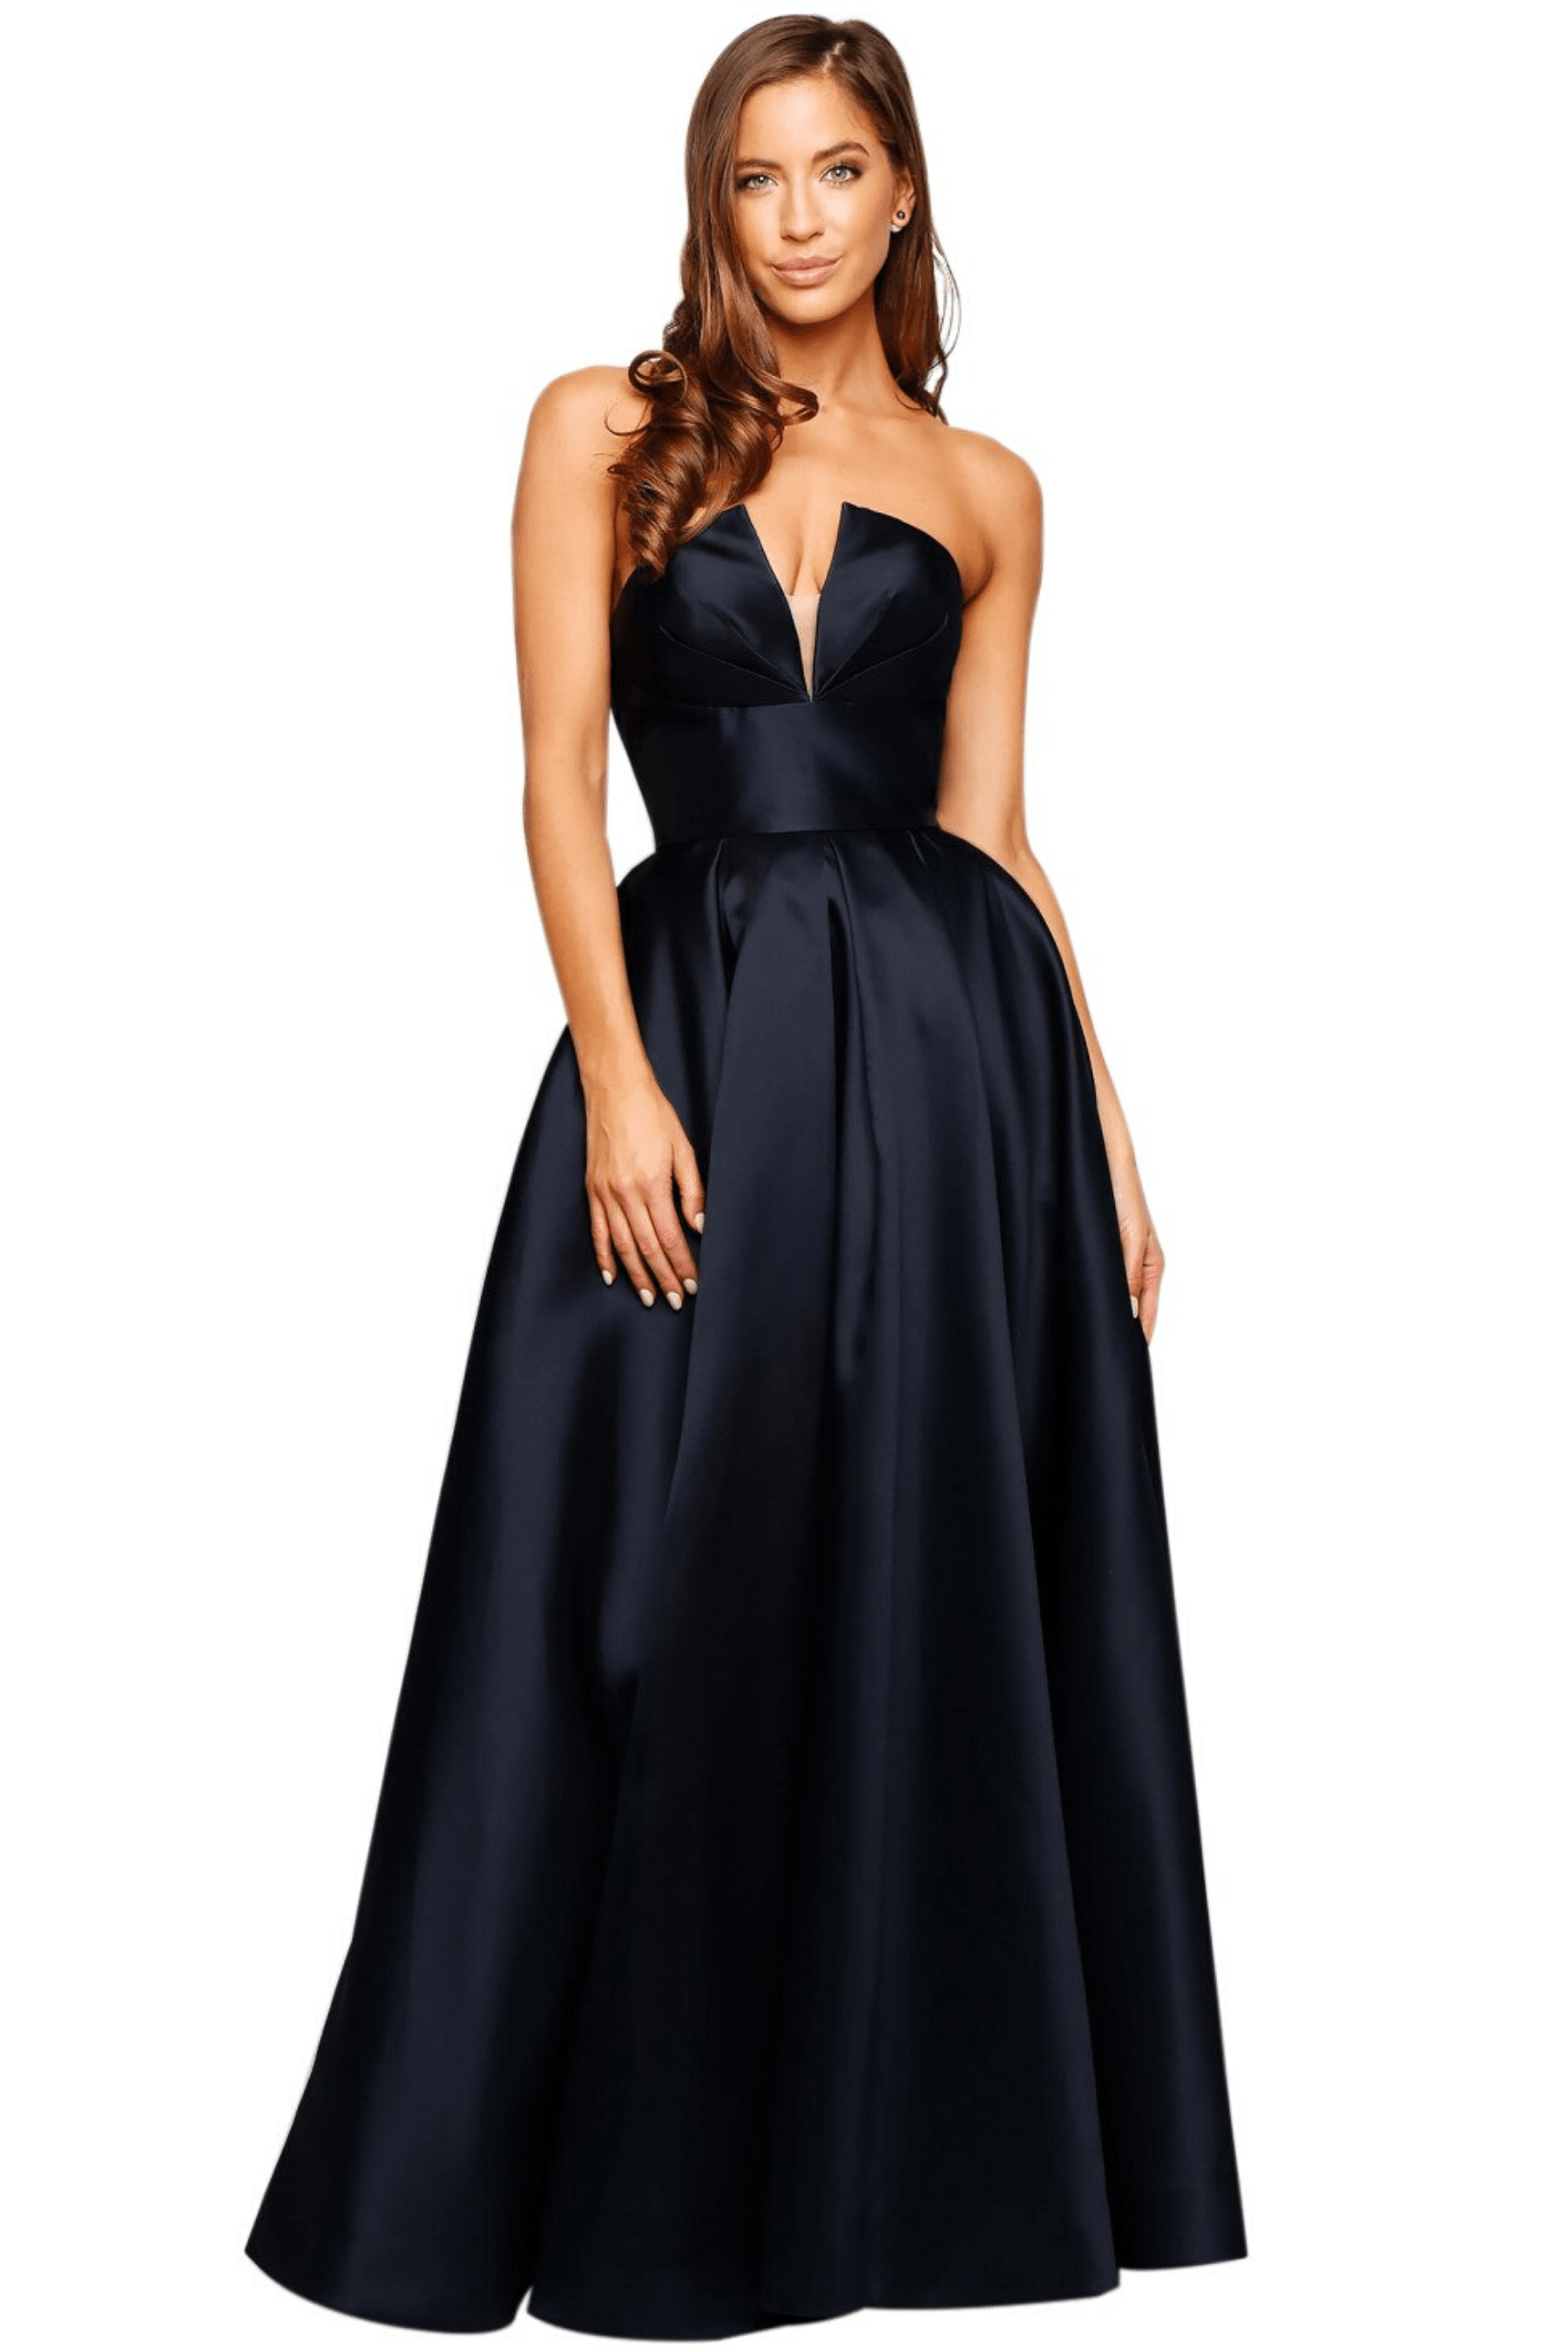 Tinaholy BUY IT TANIA OLSEN Emma Gown PO852-B1 (Blue) - tinaholy-lucille-gown-ta611-navy-blue---rrp-0-dress-for-a-night-30756951_9bd722e3-8e2c-4b04-b1fb-9e2d87d8d657.png